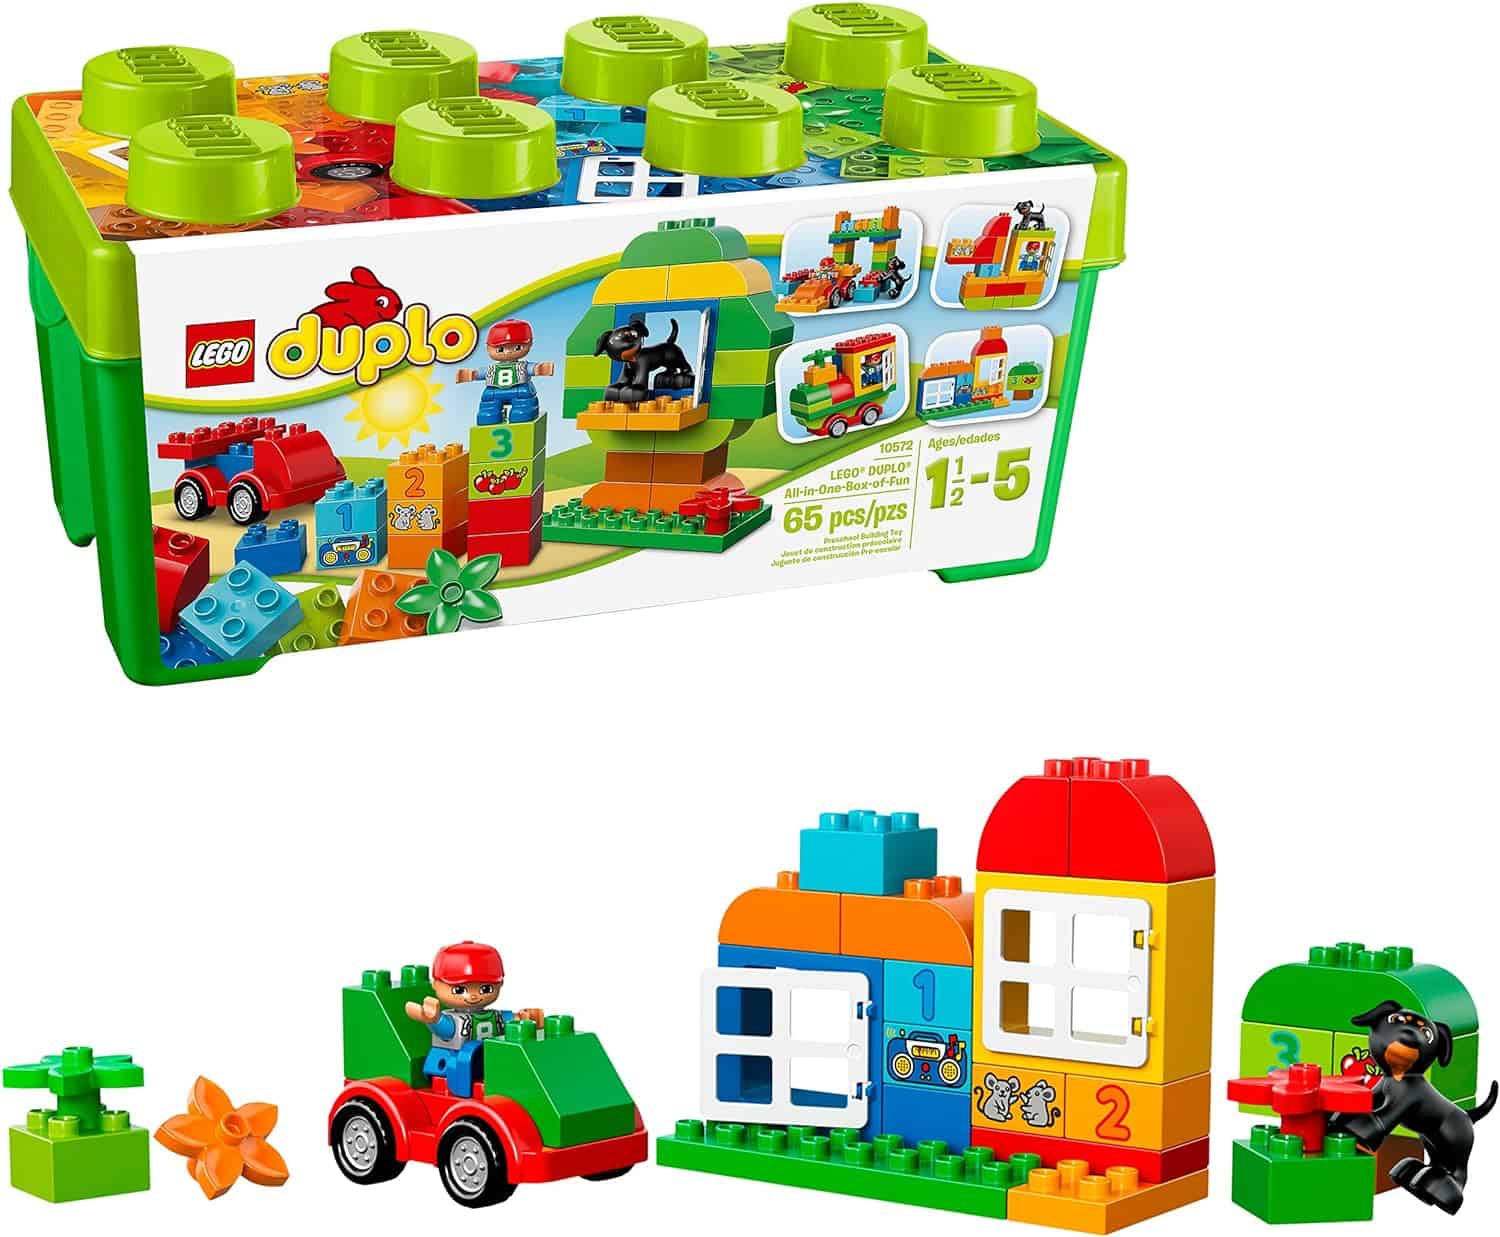 All-in-One LEGO Duplo box- Ages 18 months and up: Best LEGO Duplo Sets